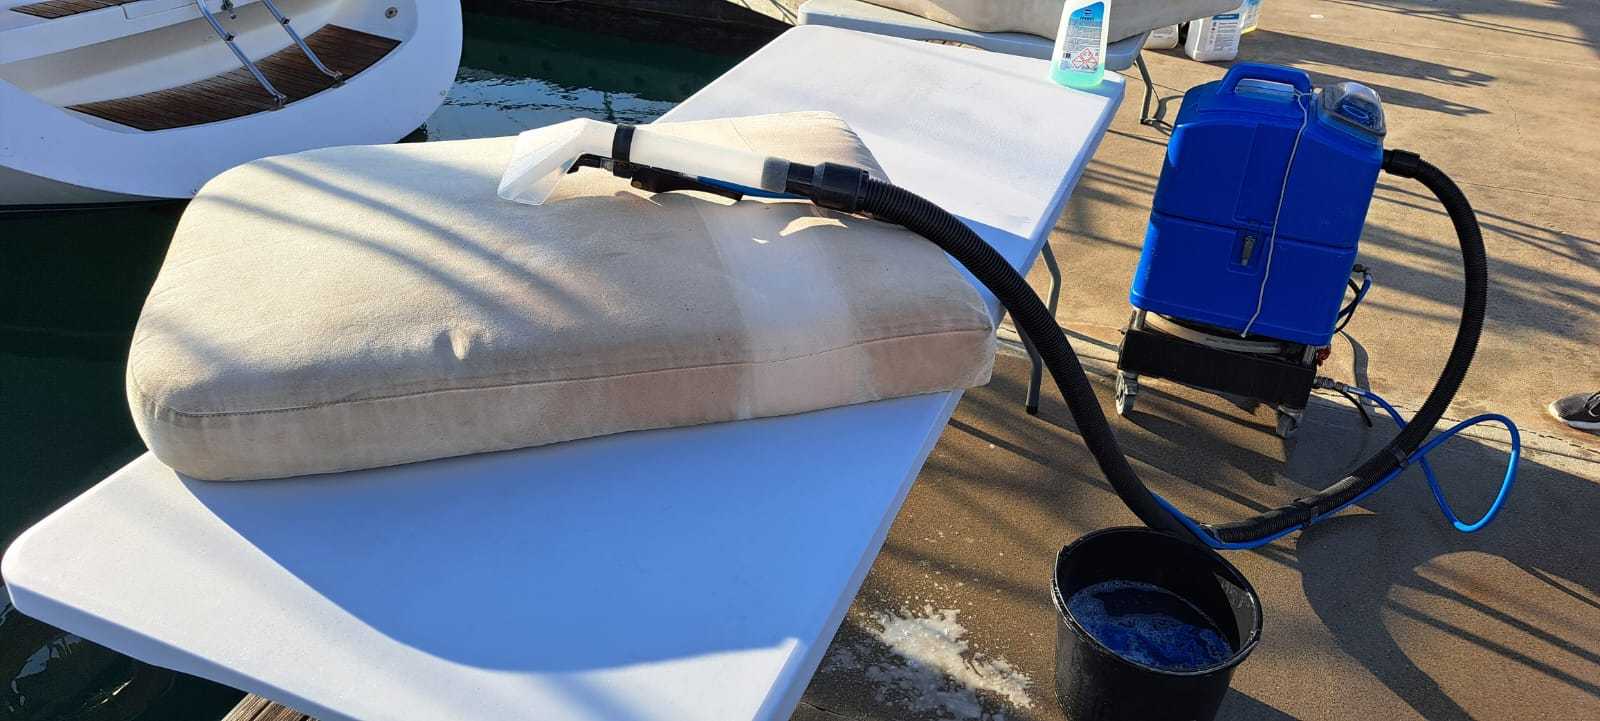 Upholstery cleaning yachting